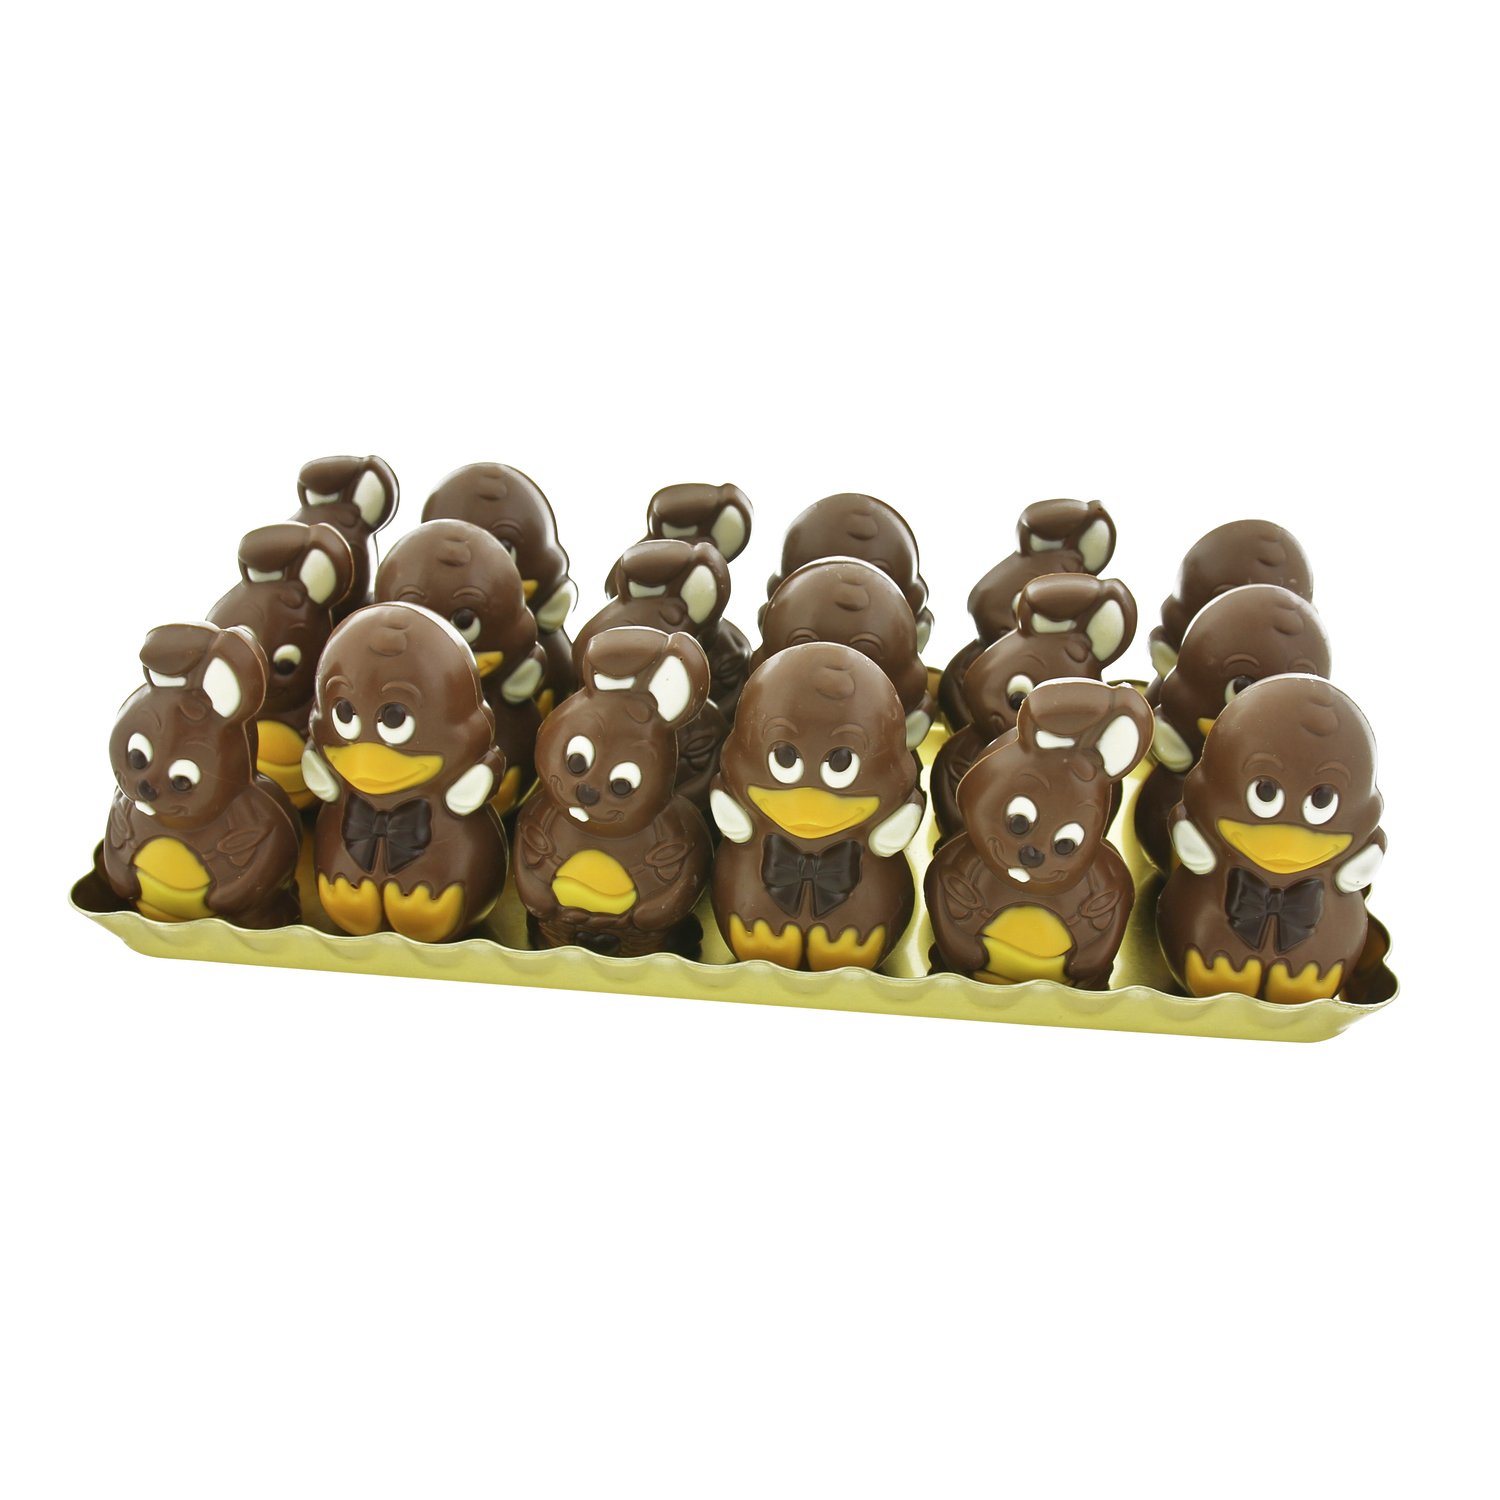 Decorated hollow milk choc Quacky and Fluffy figures on gold tray - 36x55g